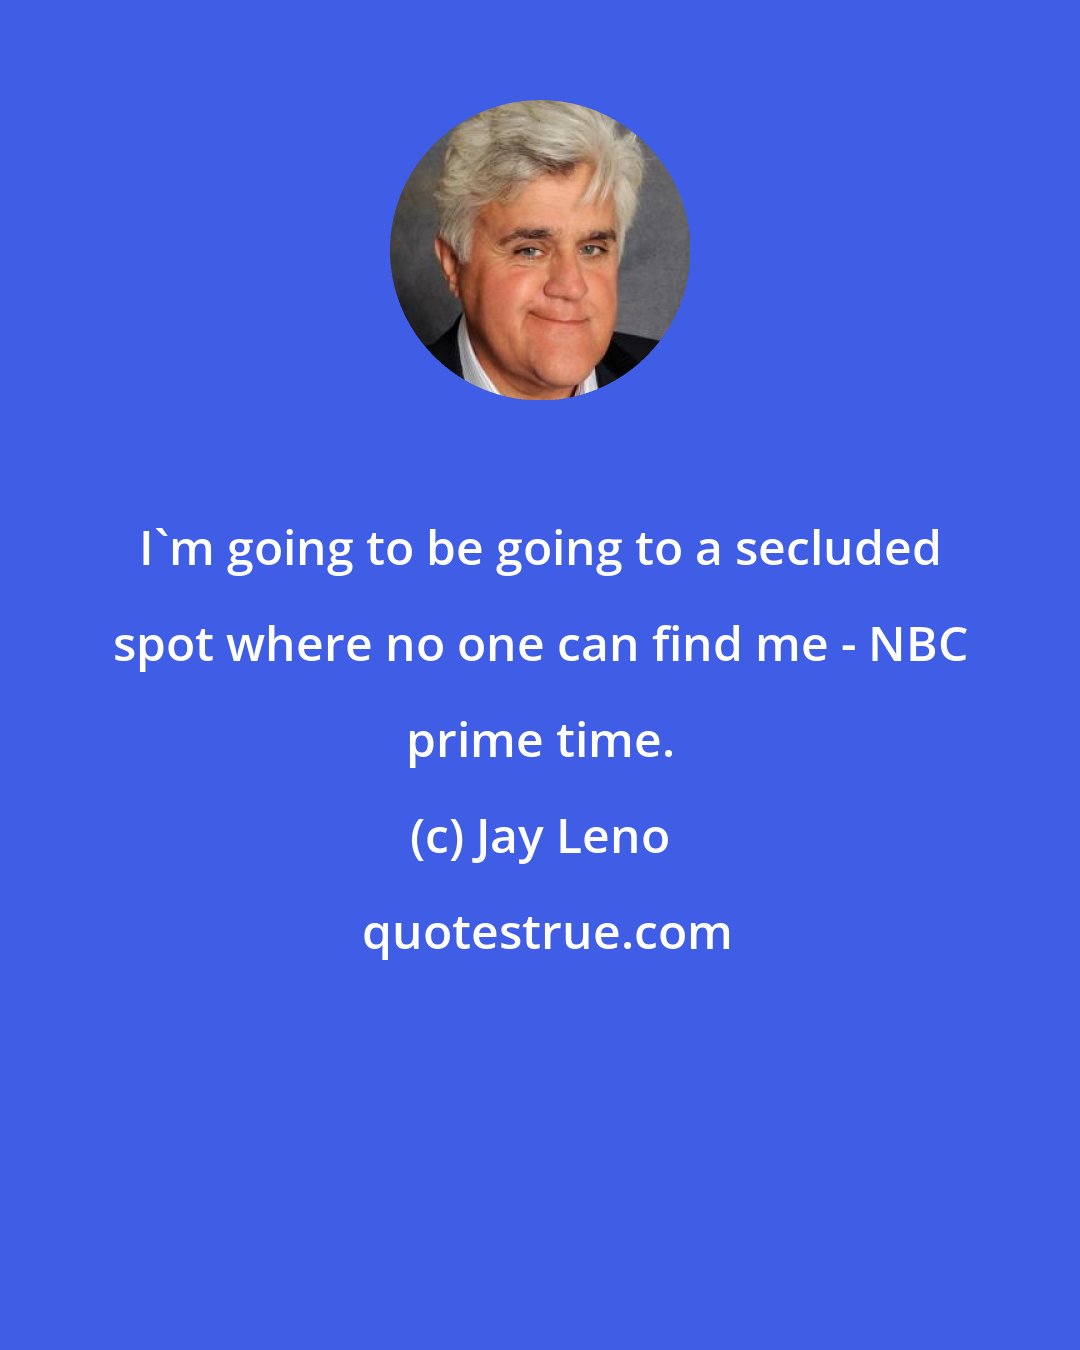 Jay Leno: I'm going to be going to a secluded spot where no one can find me - NBC prime time.